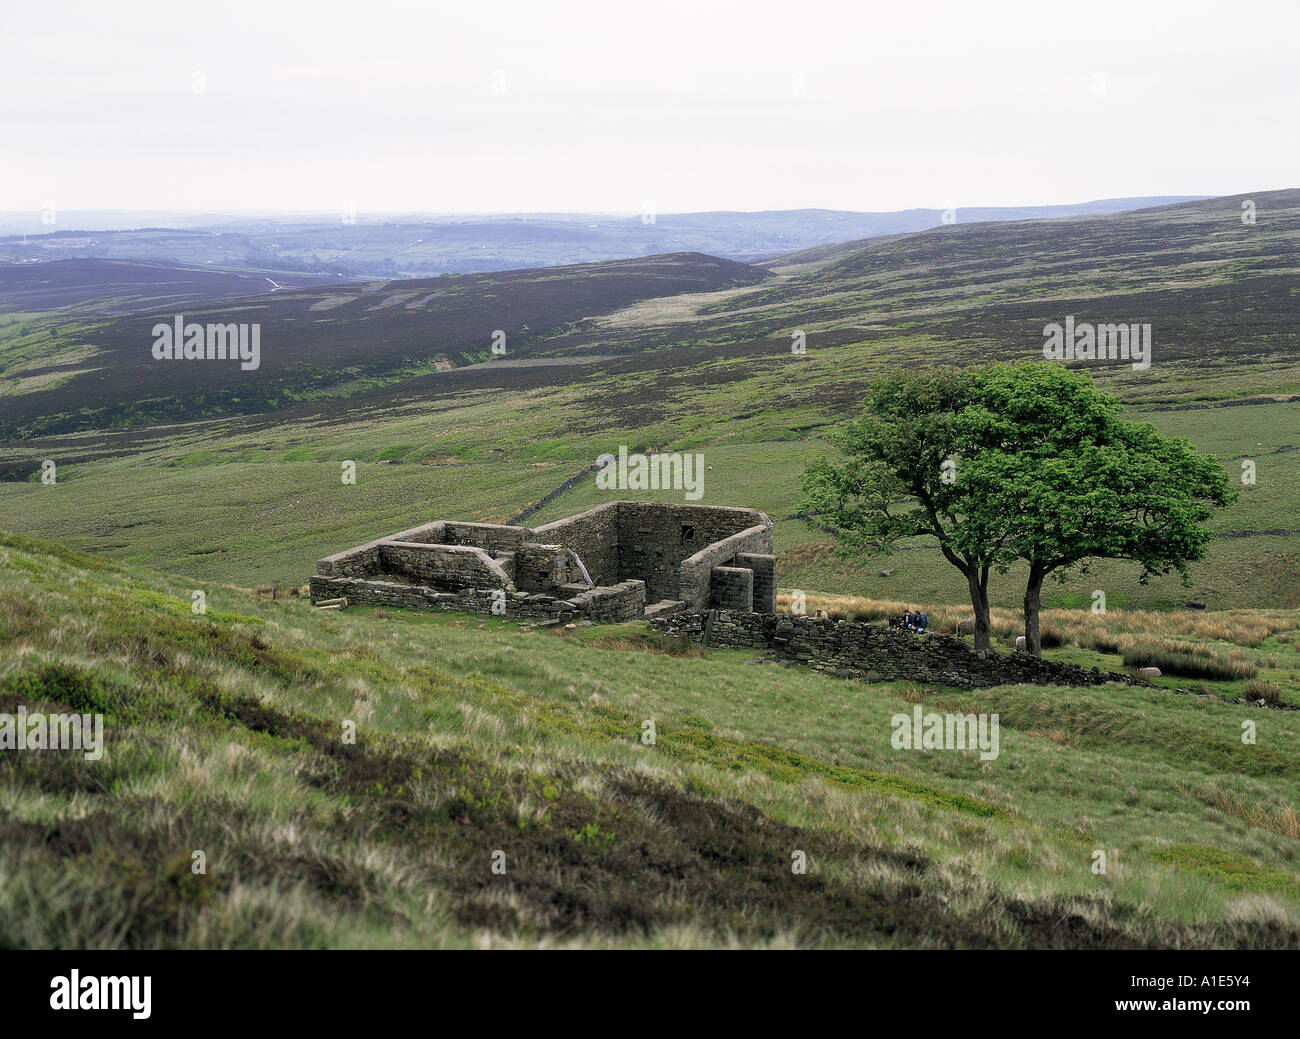 L'emplacement de Charlotte Bronte Wuthering Heights roman en Angleterre Yorkshire Dales Banque D'Images